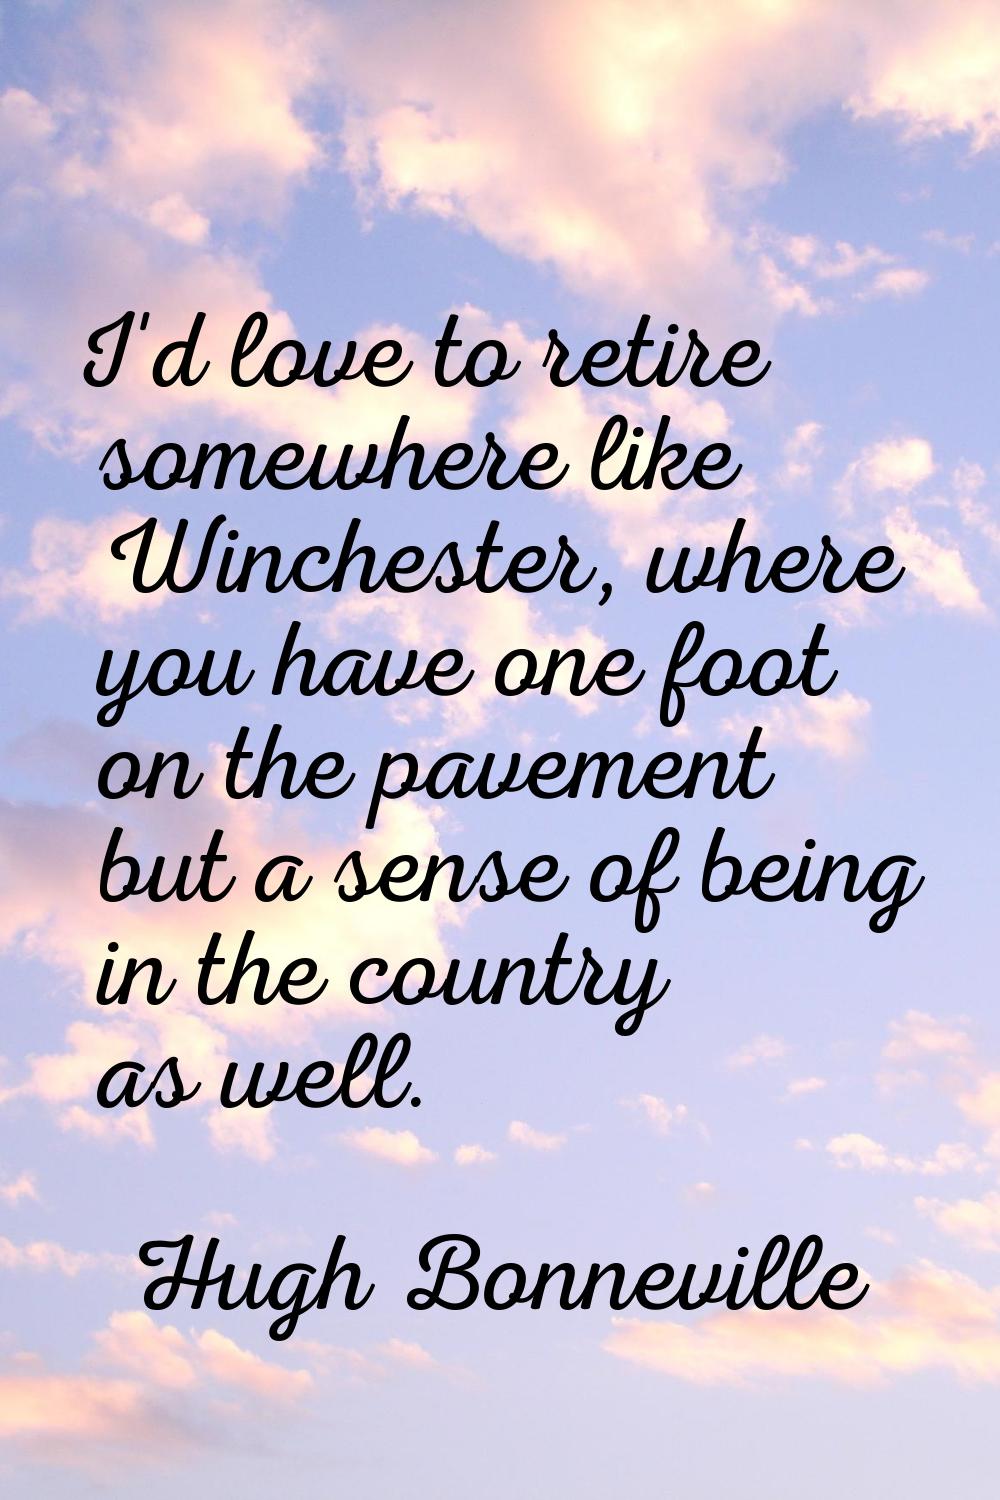 I'd love to retire somewhere like Winchester, where you have one foot on the pavement but a sense o